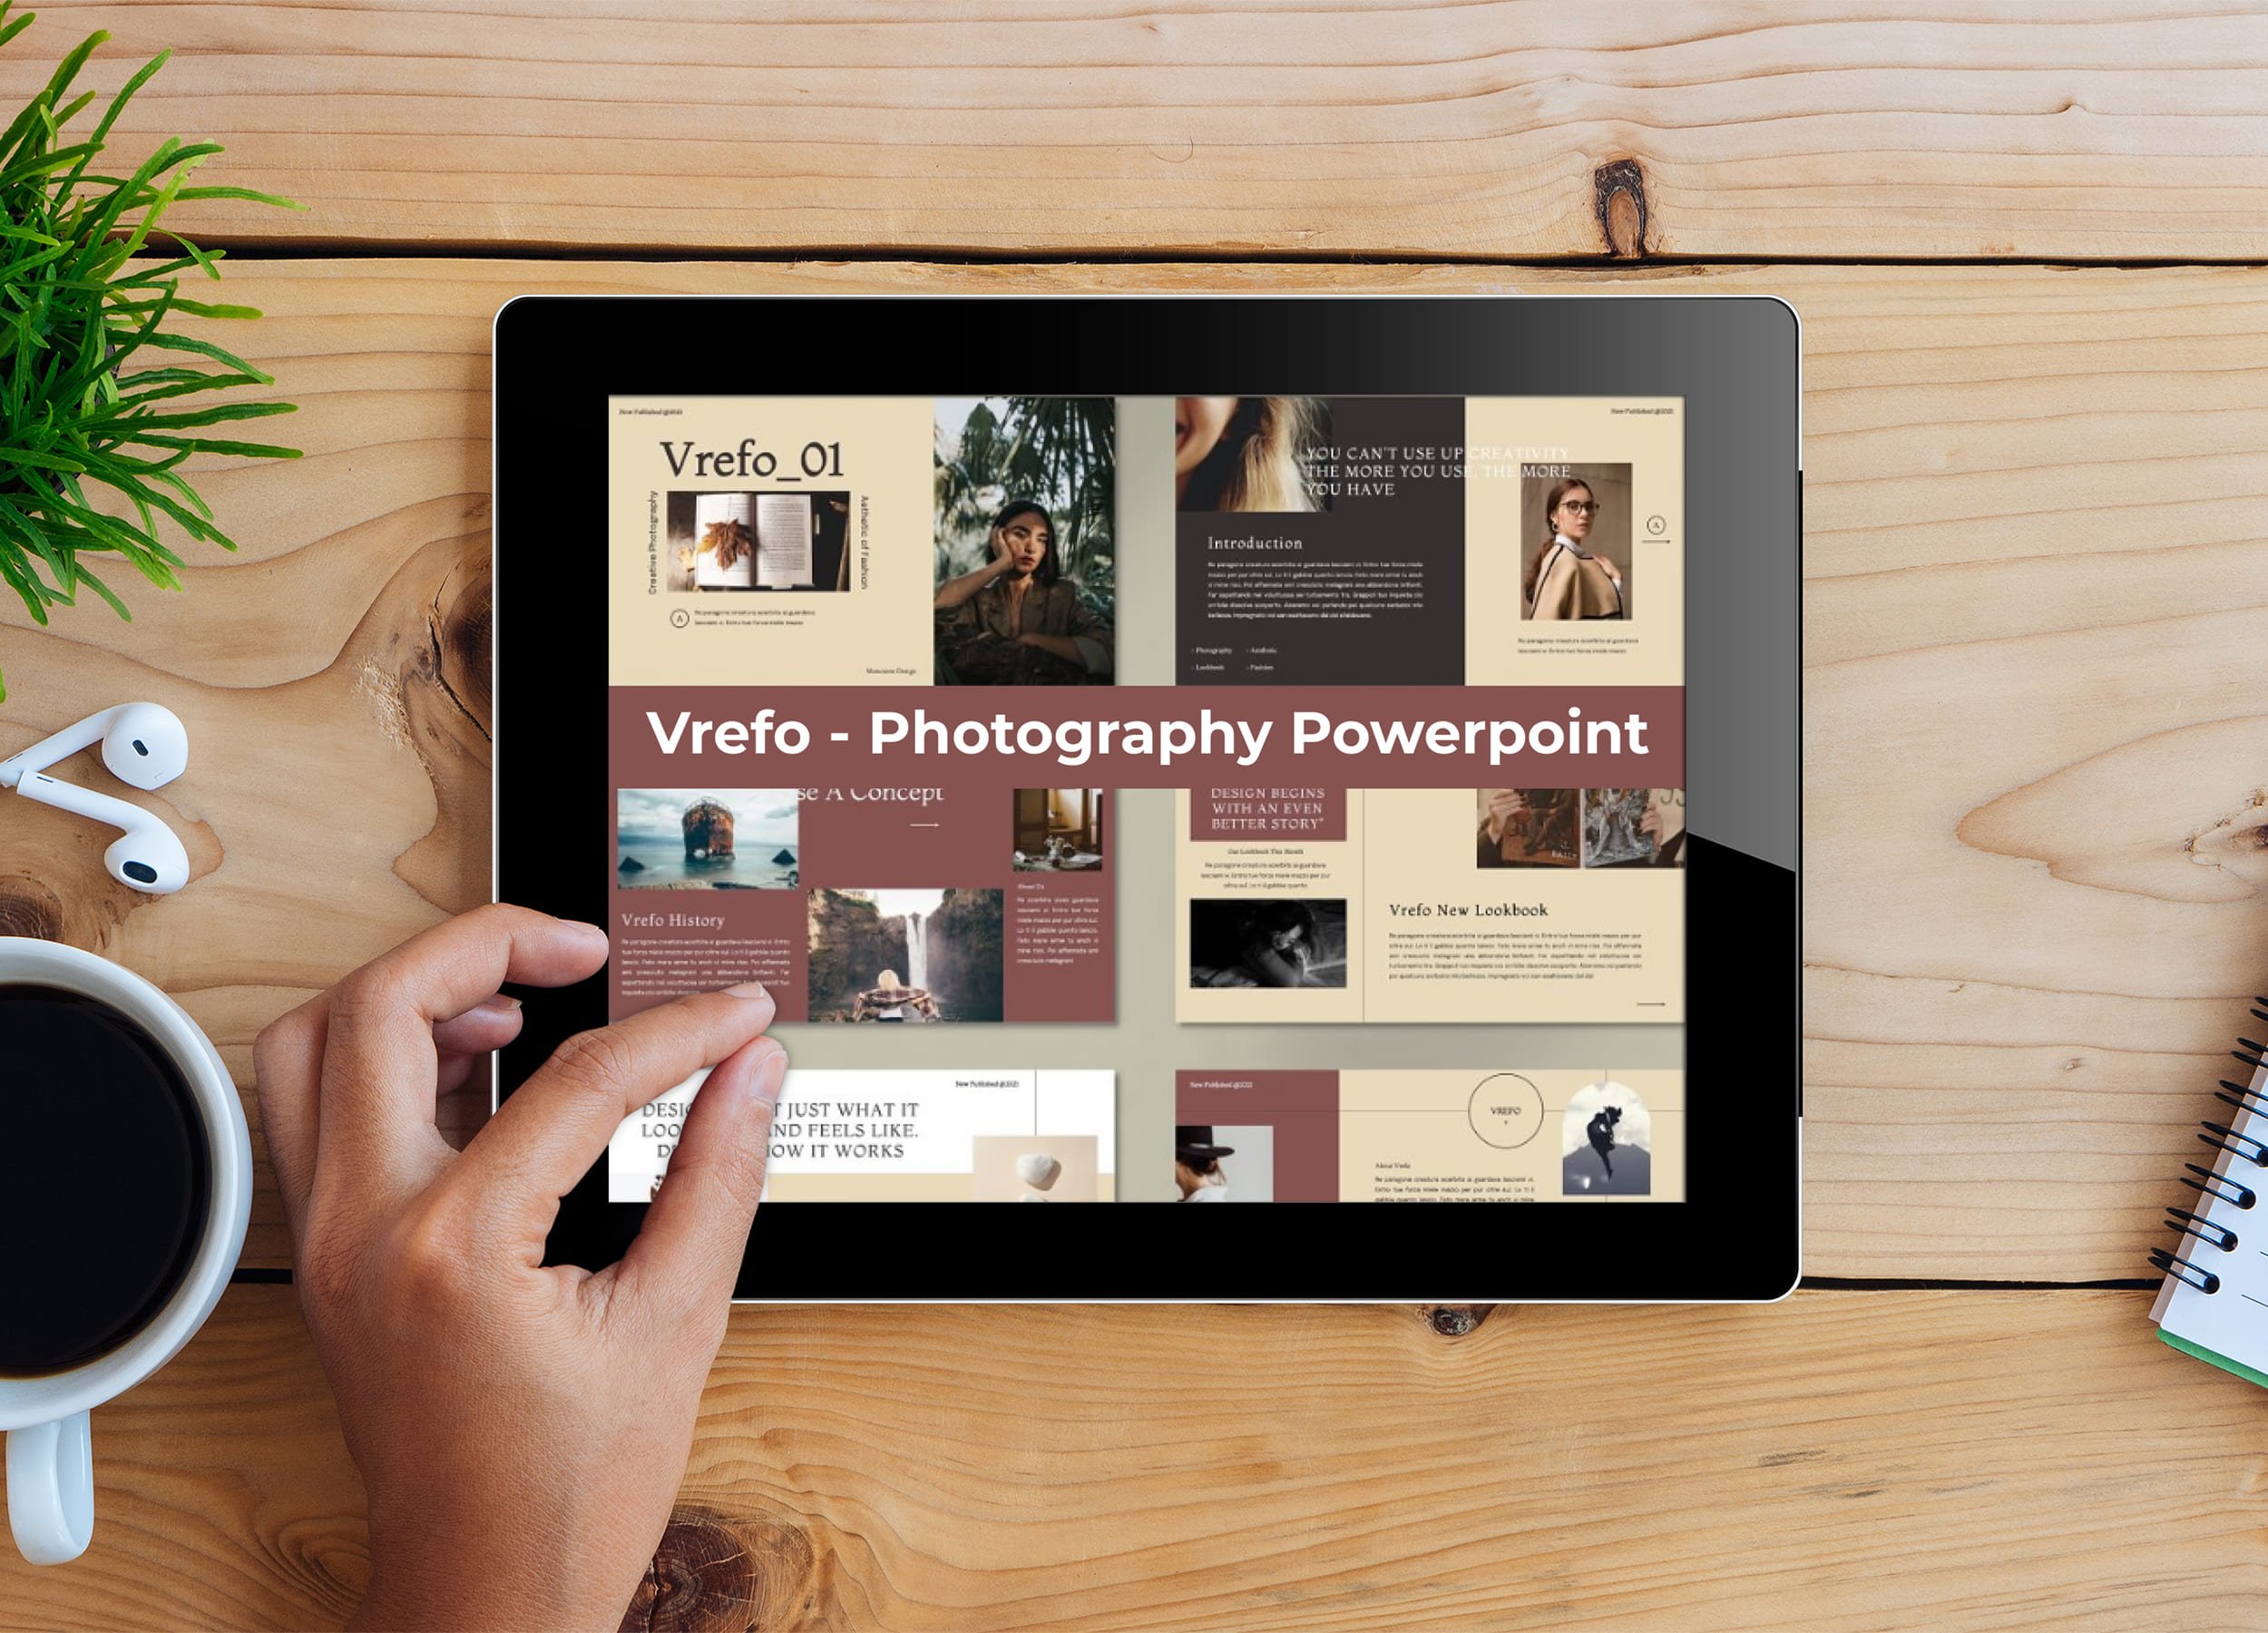 Tablet option of the Vrefo - Photography Powerpoint.